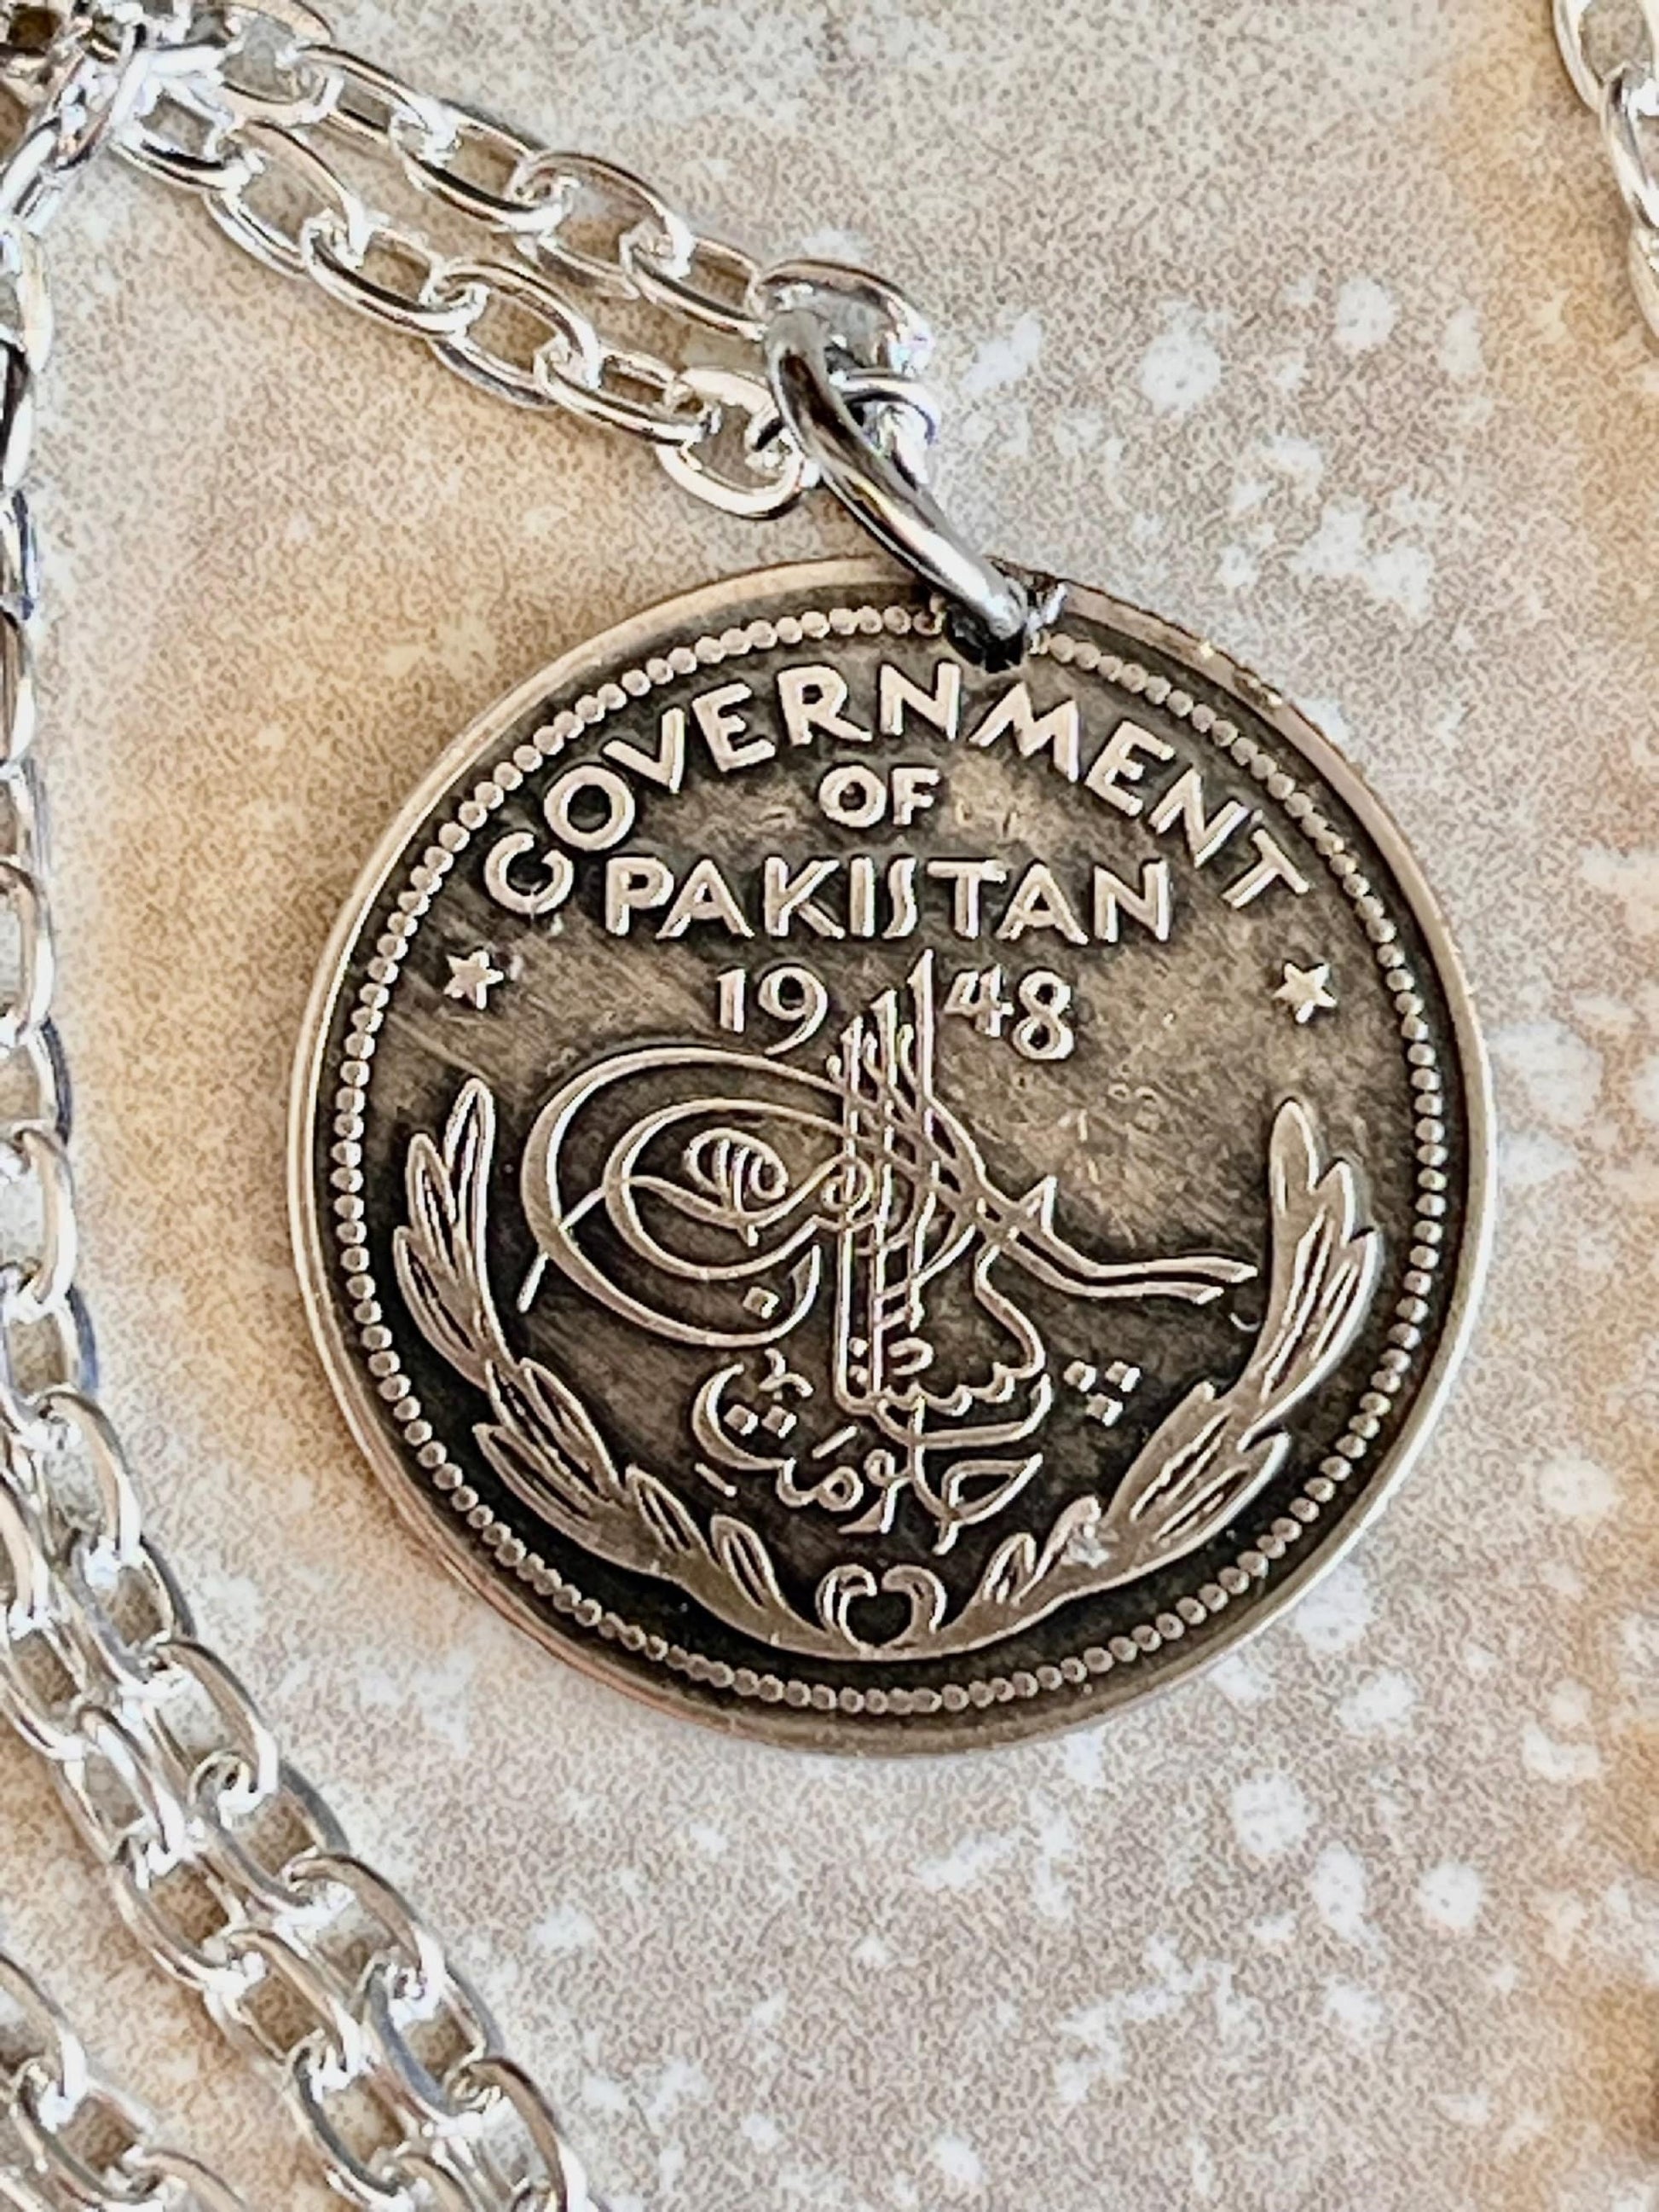 Pakistan Coin Pendant Pakistani Half Rupee Personal Necklace Old Vintage Handmade Jewelry Gift Friend Charm For Him Her World Coin Collector